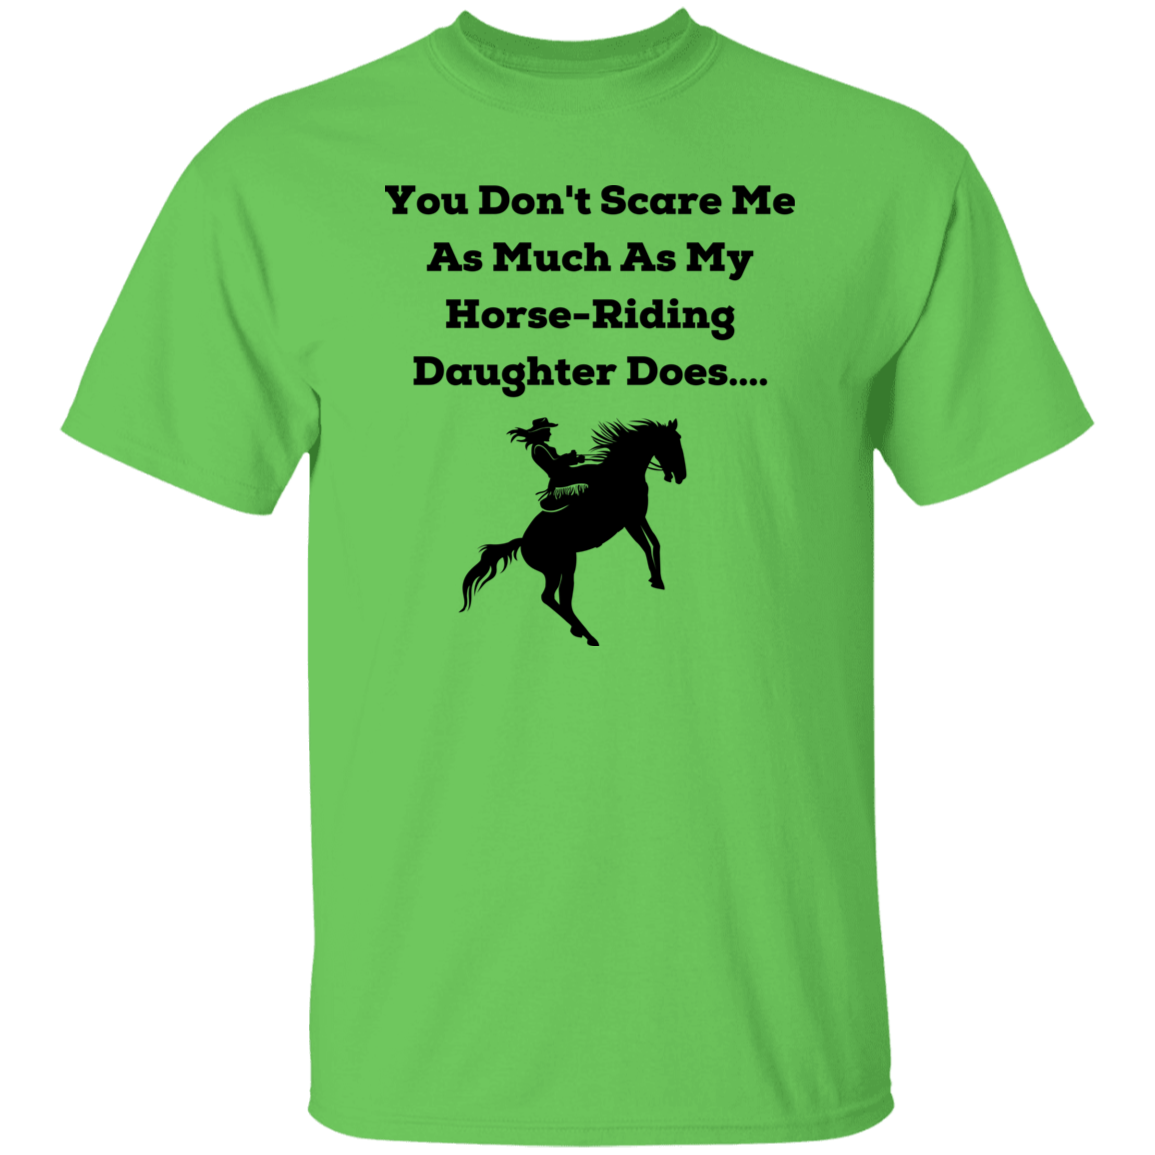 You Don't Scare Me T-Shirt Unisex